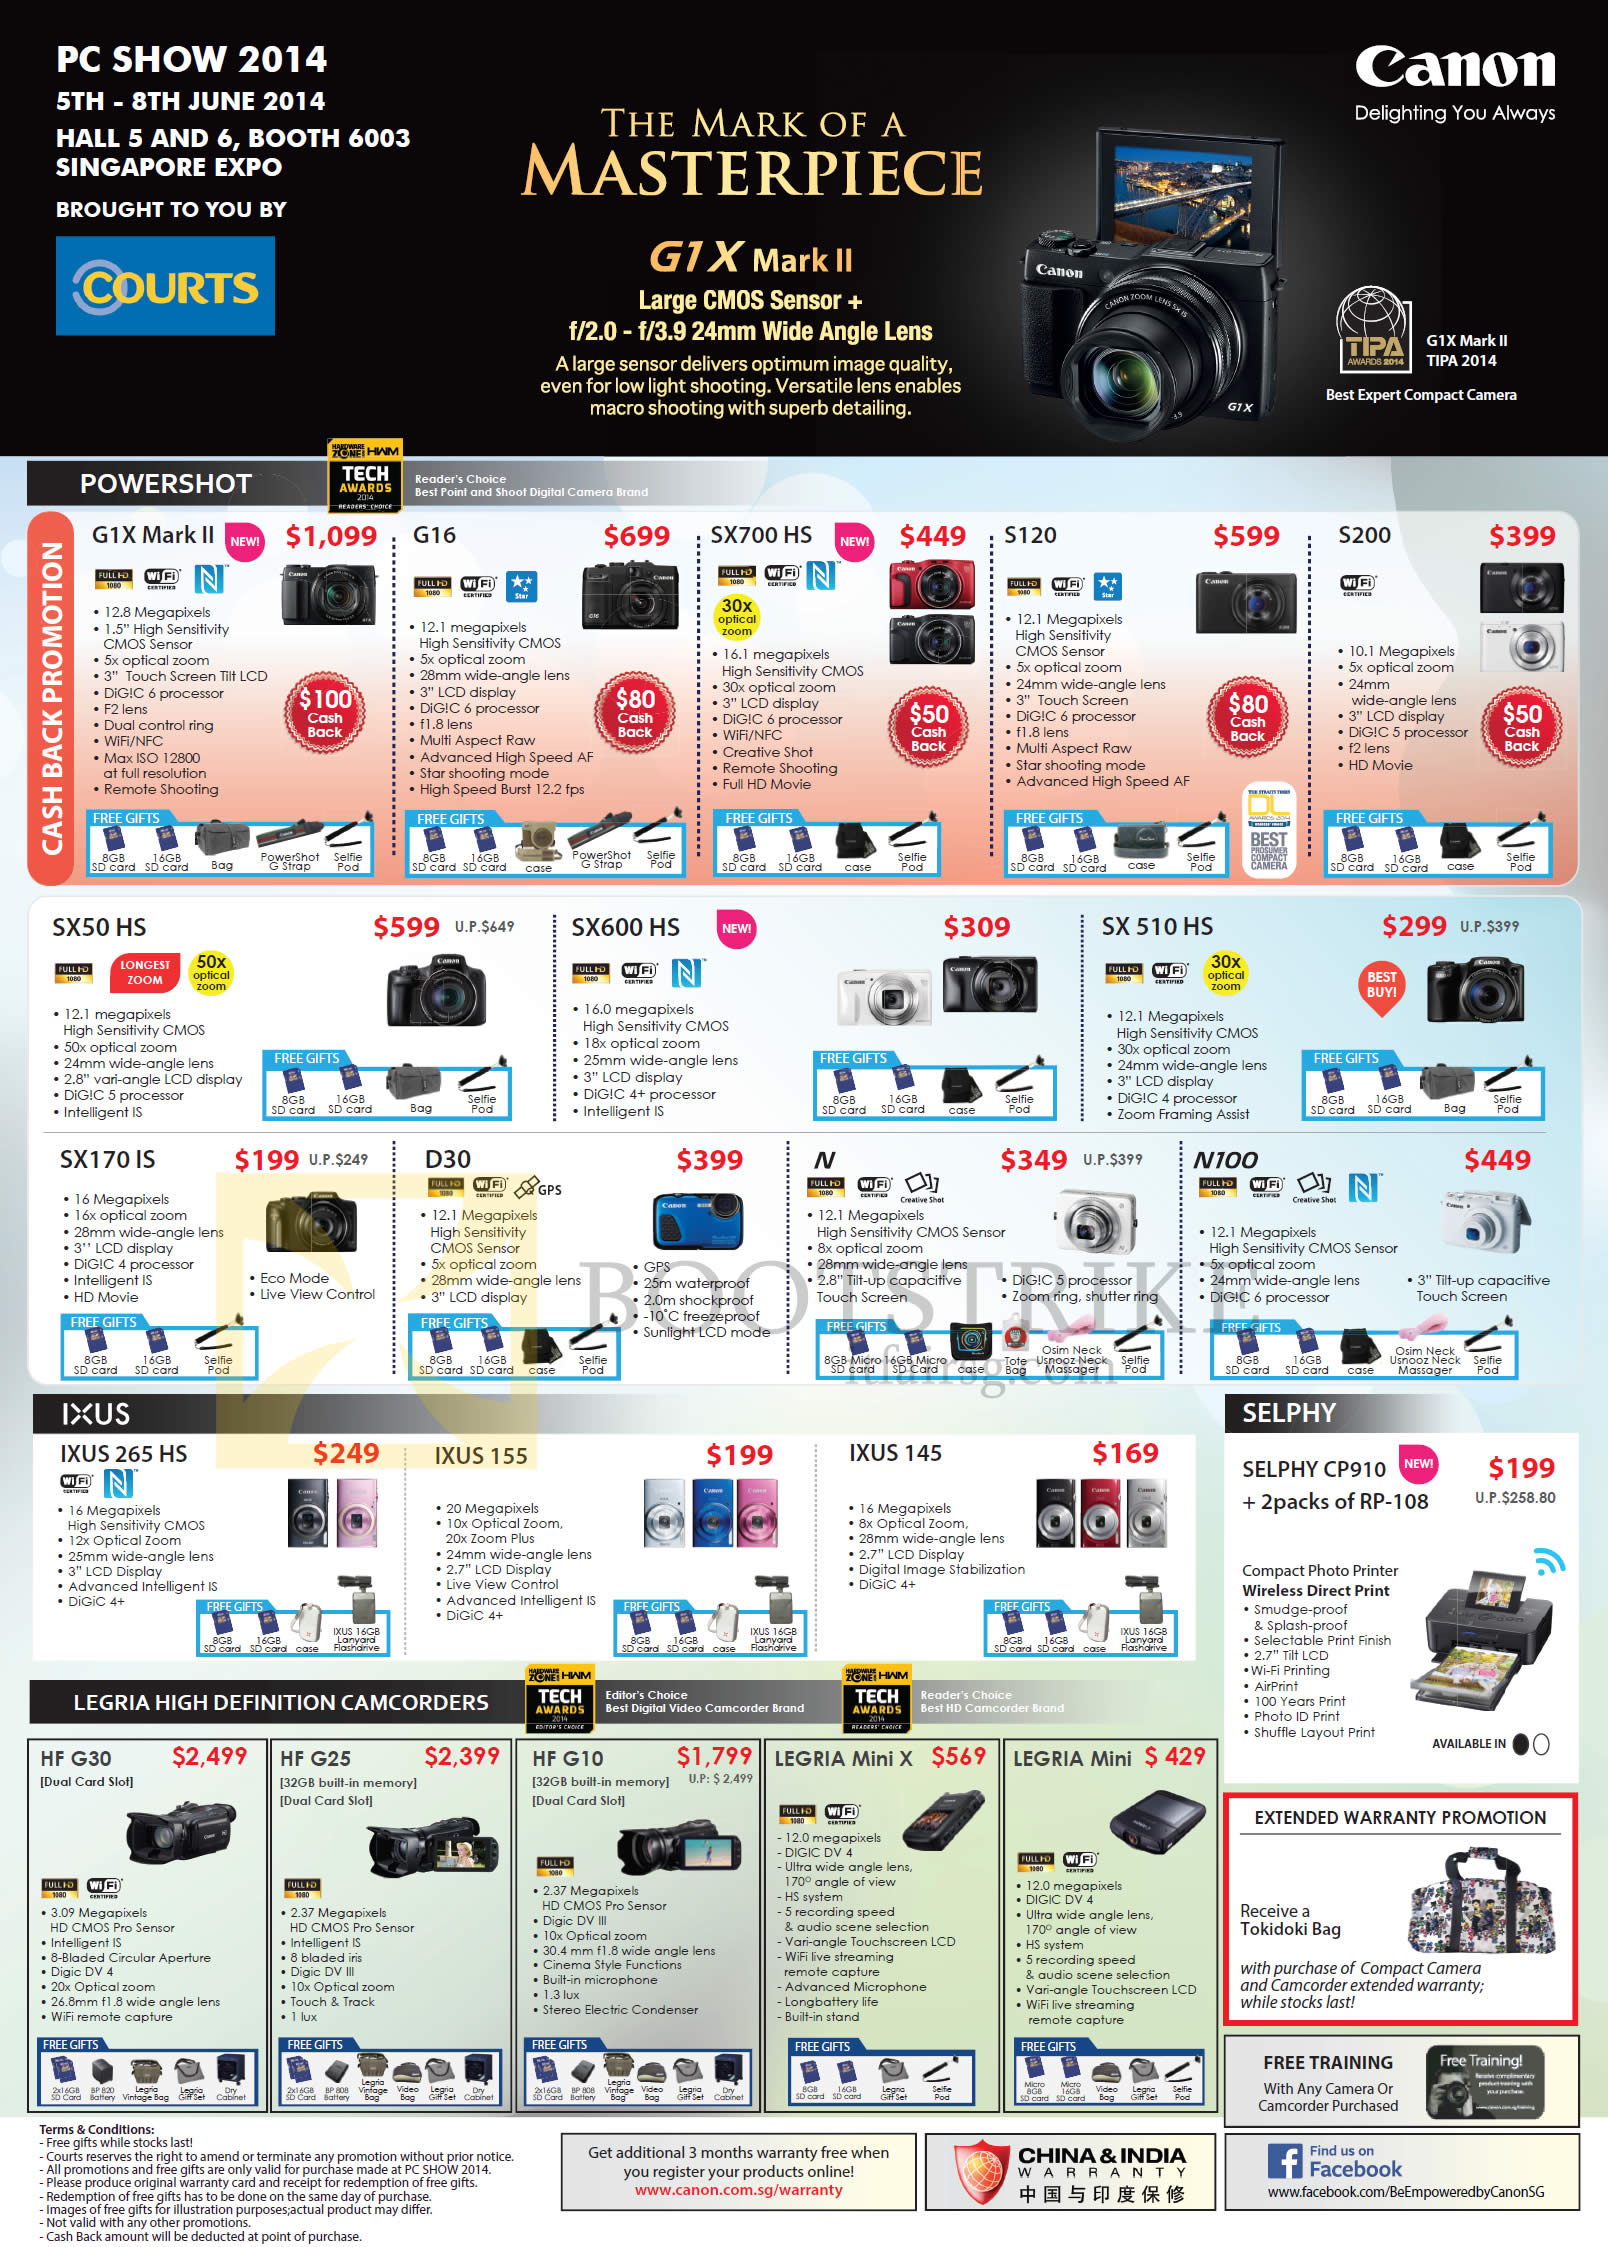 PC SHOW 2014 price list image brochure of Canon Digital Cameras, Camcorders, G1X Mark II, G16, SX700 HS, S120, S200, 50 HS, 600 HS, 510 HS, SX170 IS, D30, IXUS 265 HS 155,145, HF G30 G25 G10, Legria Mini X, Selphy CP910